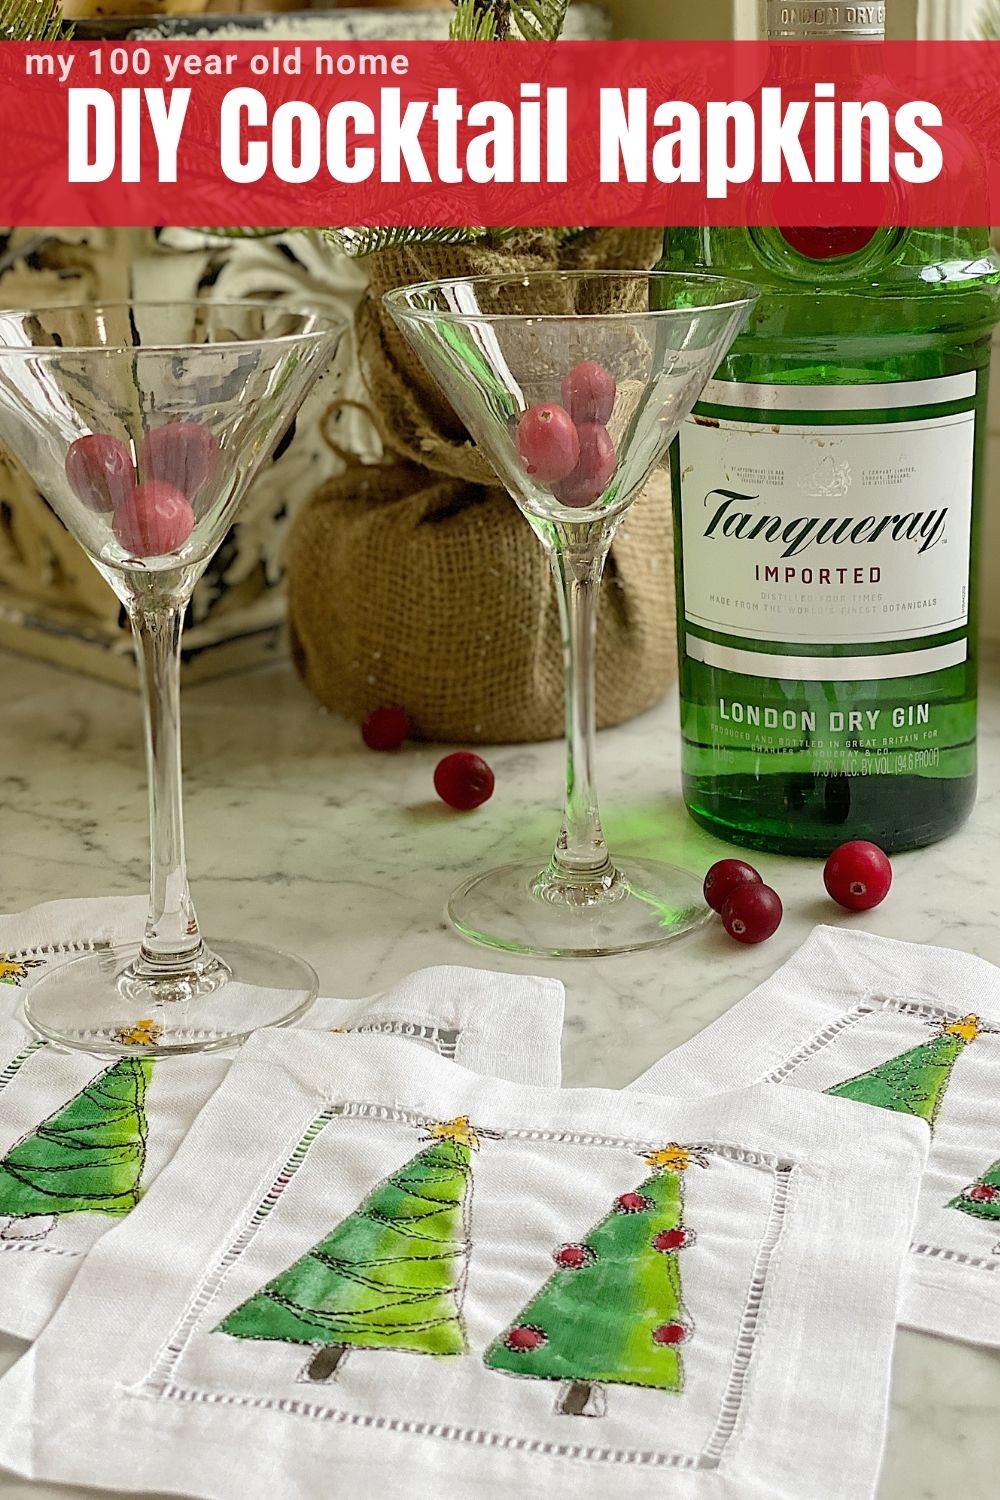 We all know that a good party starts with great drinks. Today I am sharing easy DIY cocktail napkins to give as a gift.